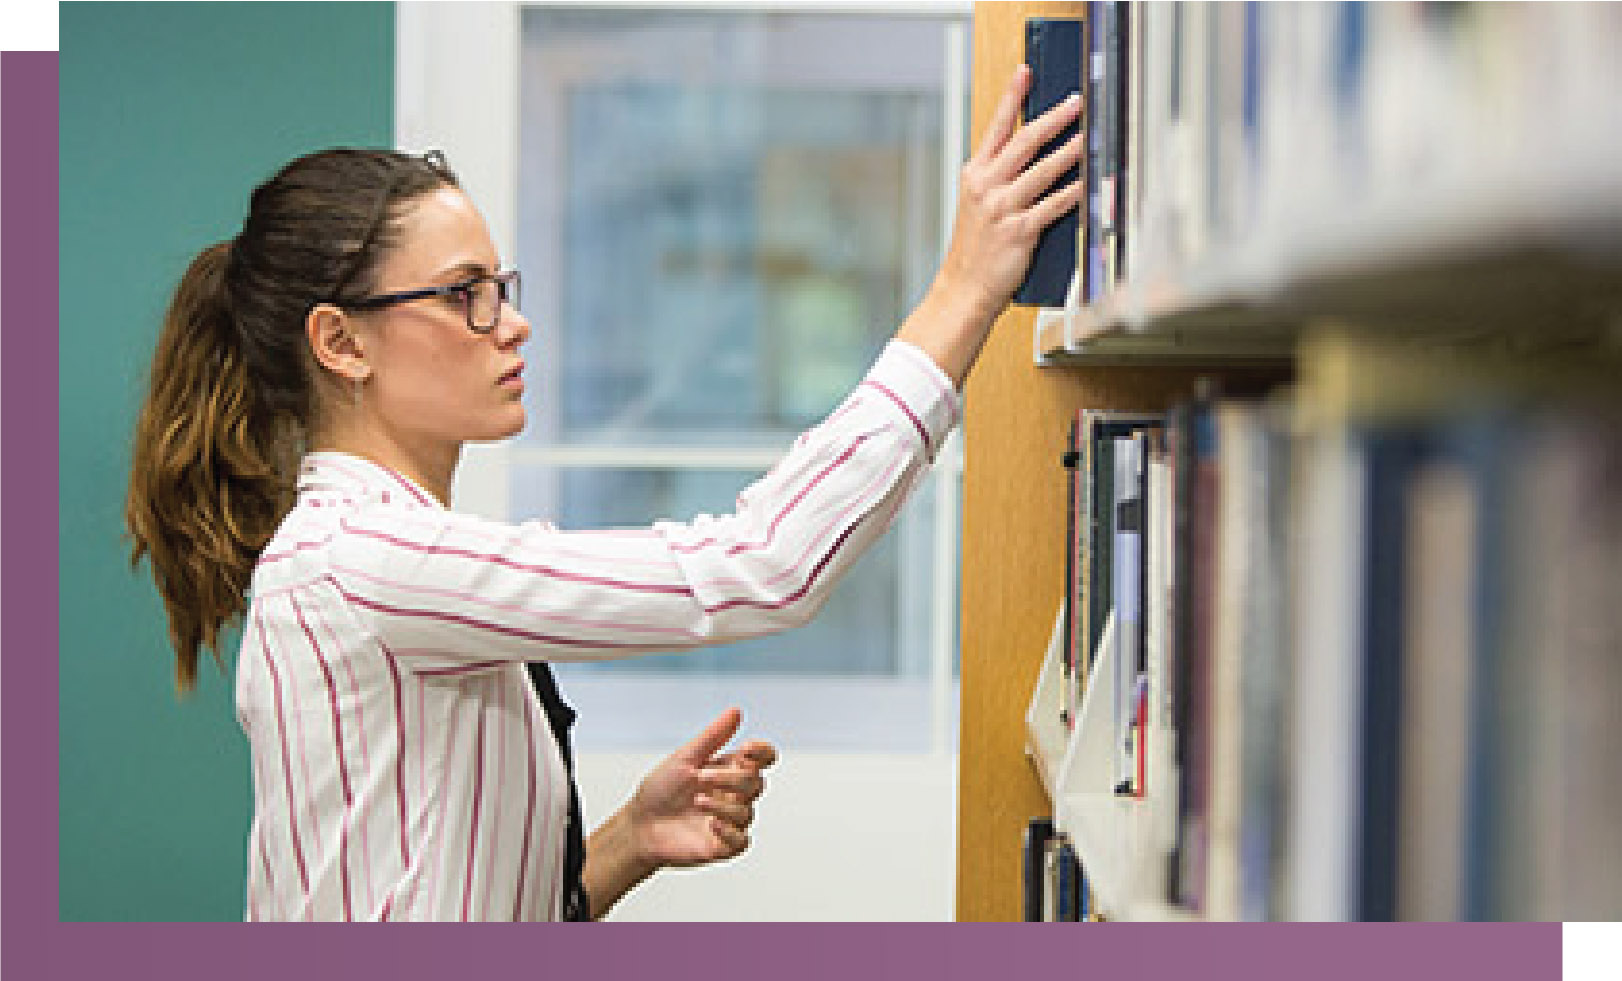 Young woman pulling book from shelf at library